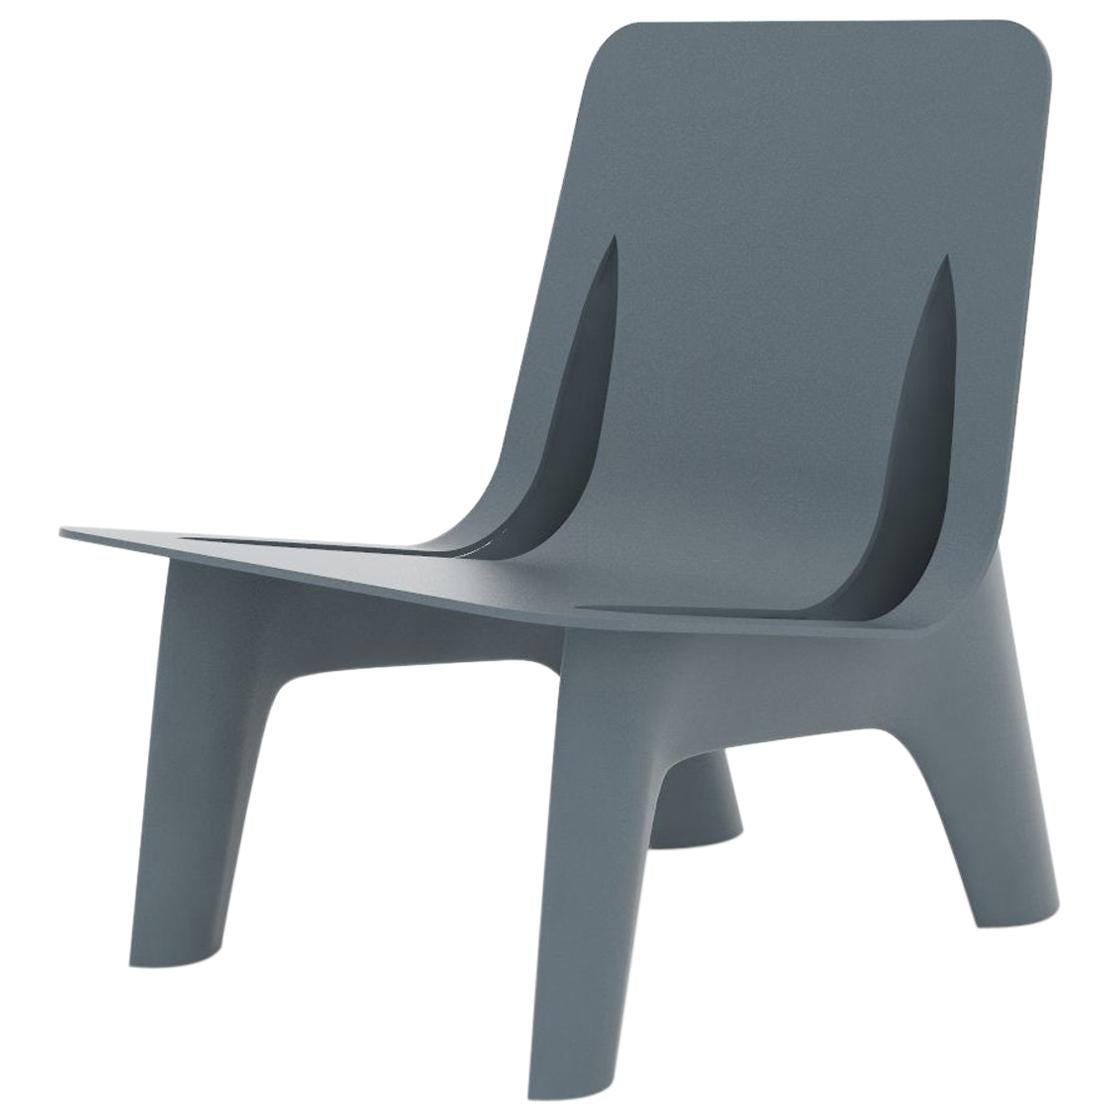 J-Chair Lounge Polished Grey Blue Color Carbon Steel Seating by Zieta